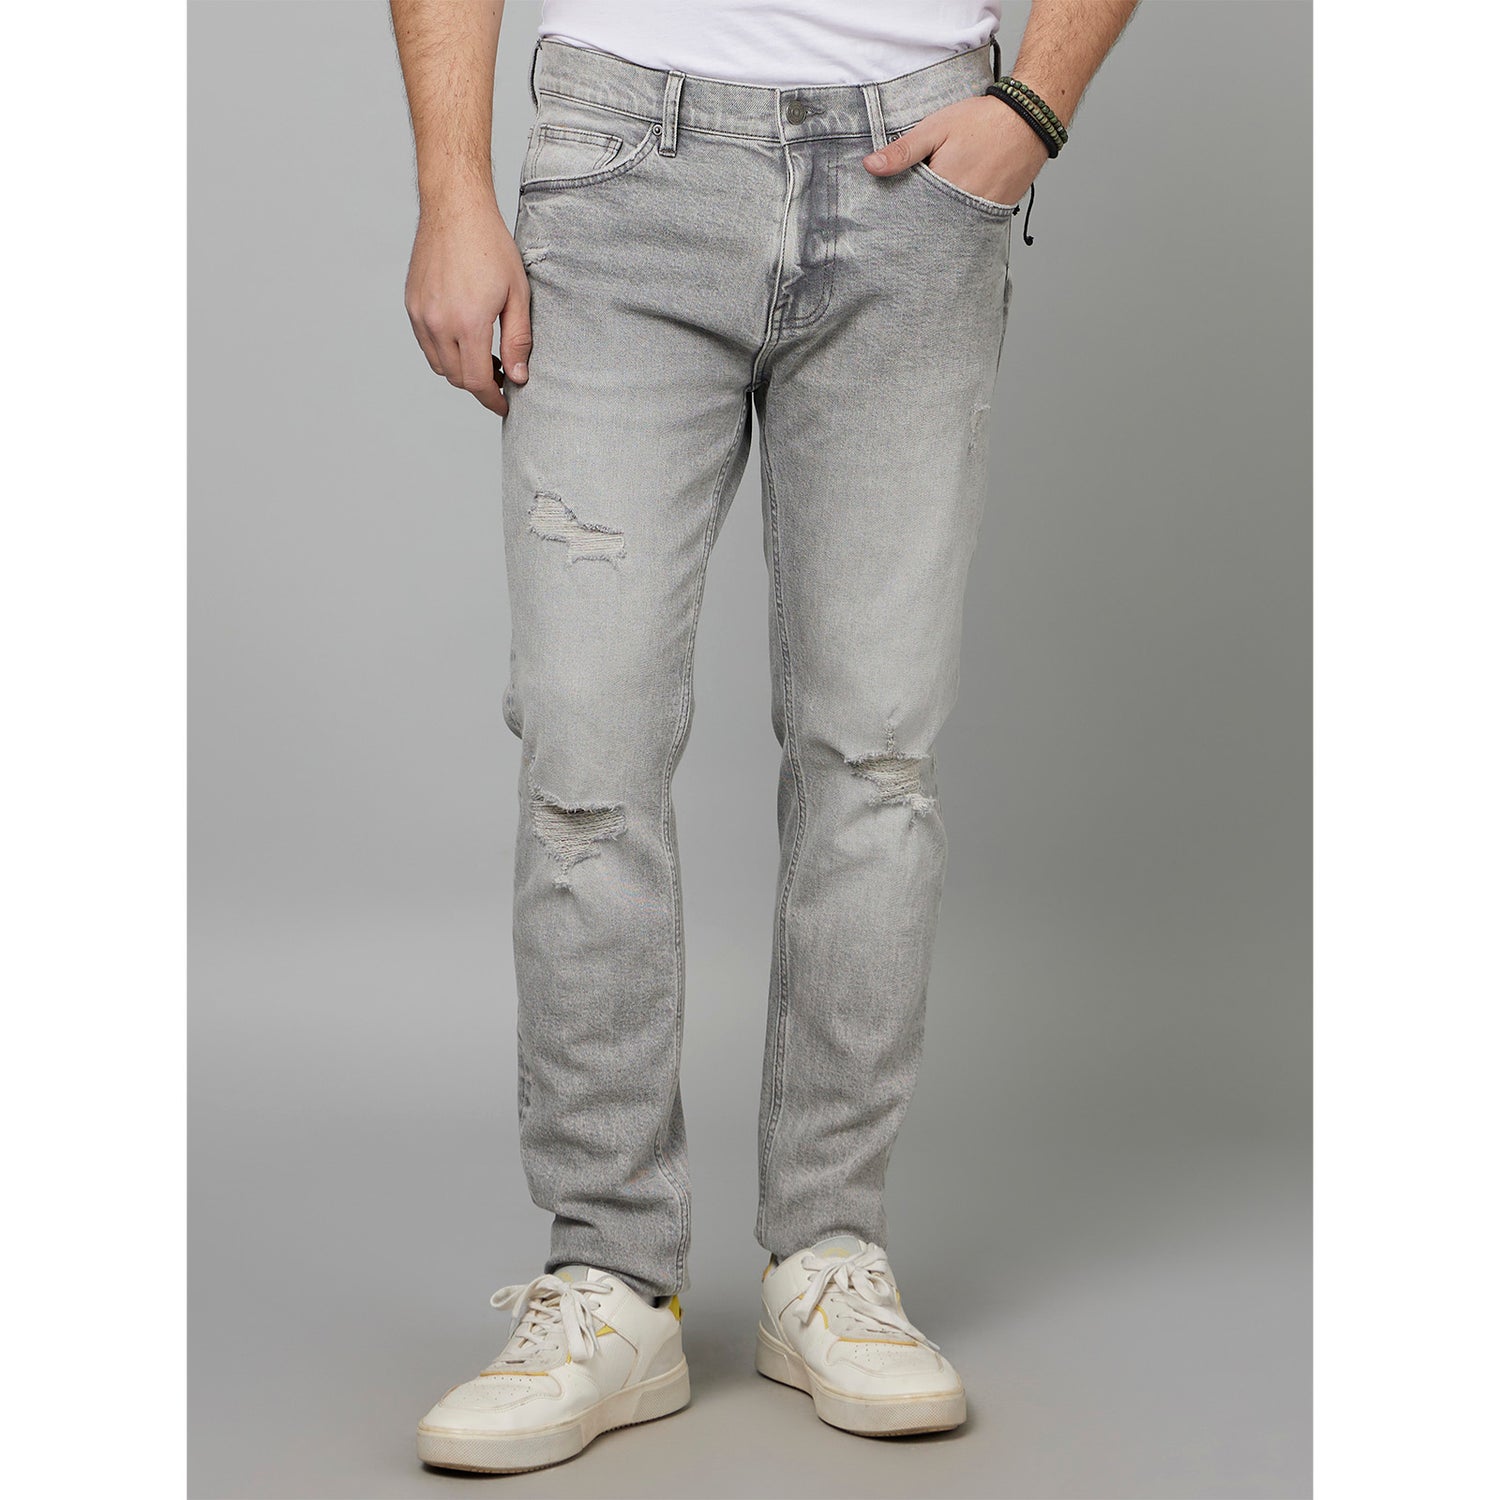 Grey Slim Fit Mildly Distressed Heavy Fade Stretchable Cotton Jeans (FOSTROY)